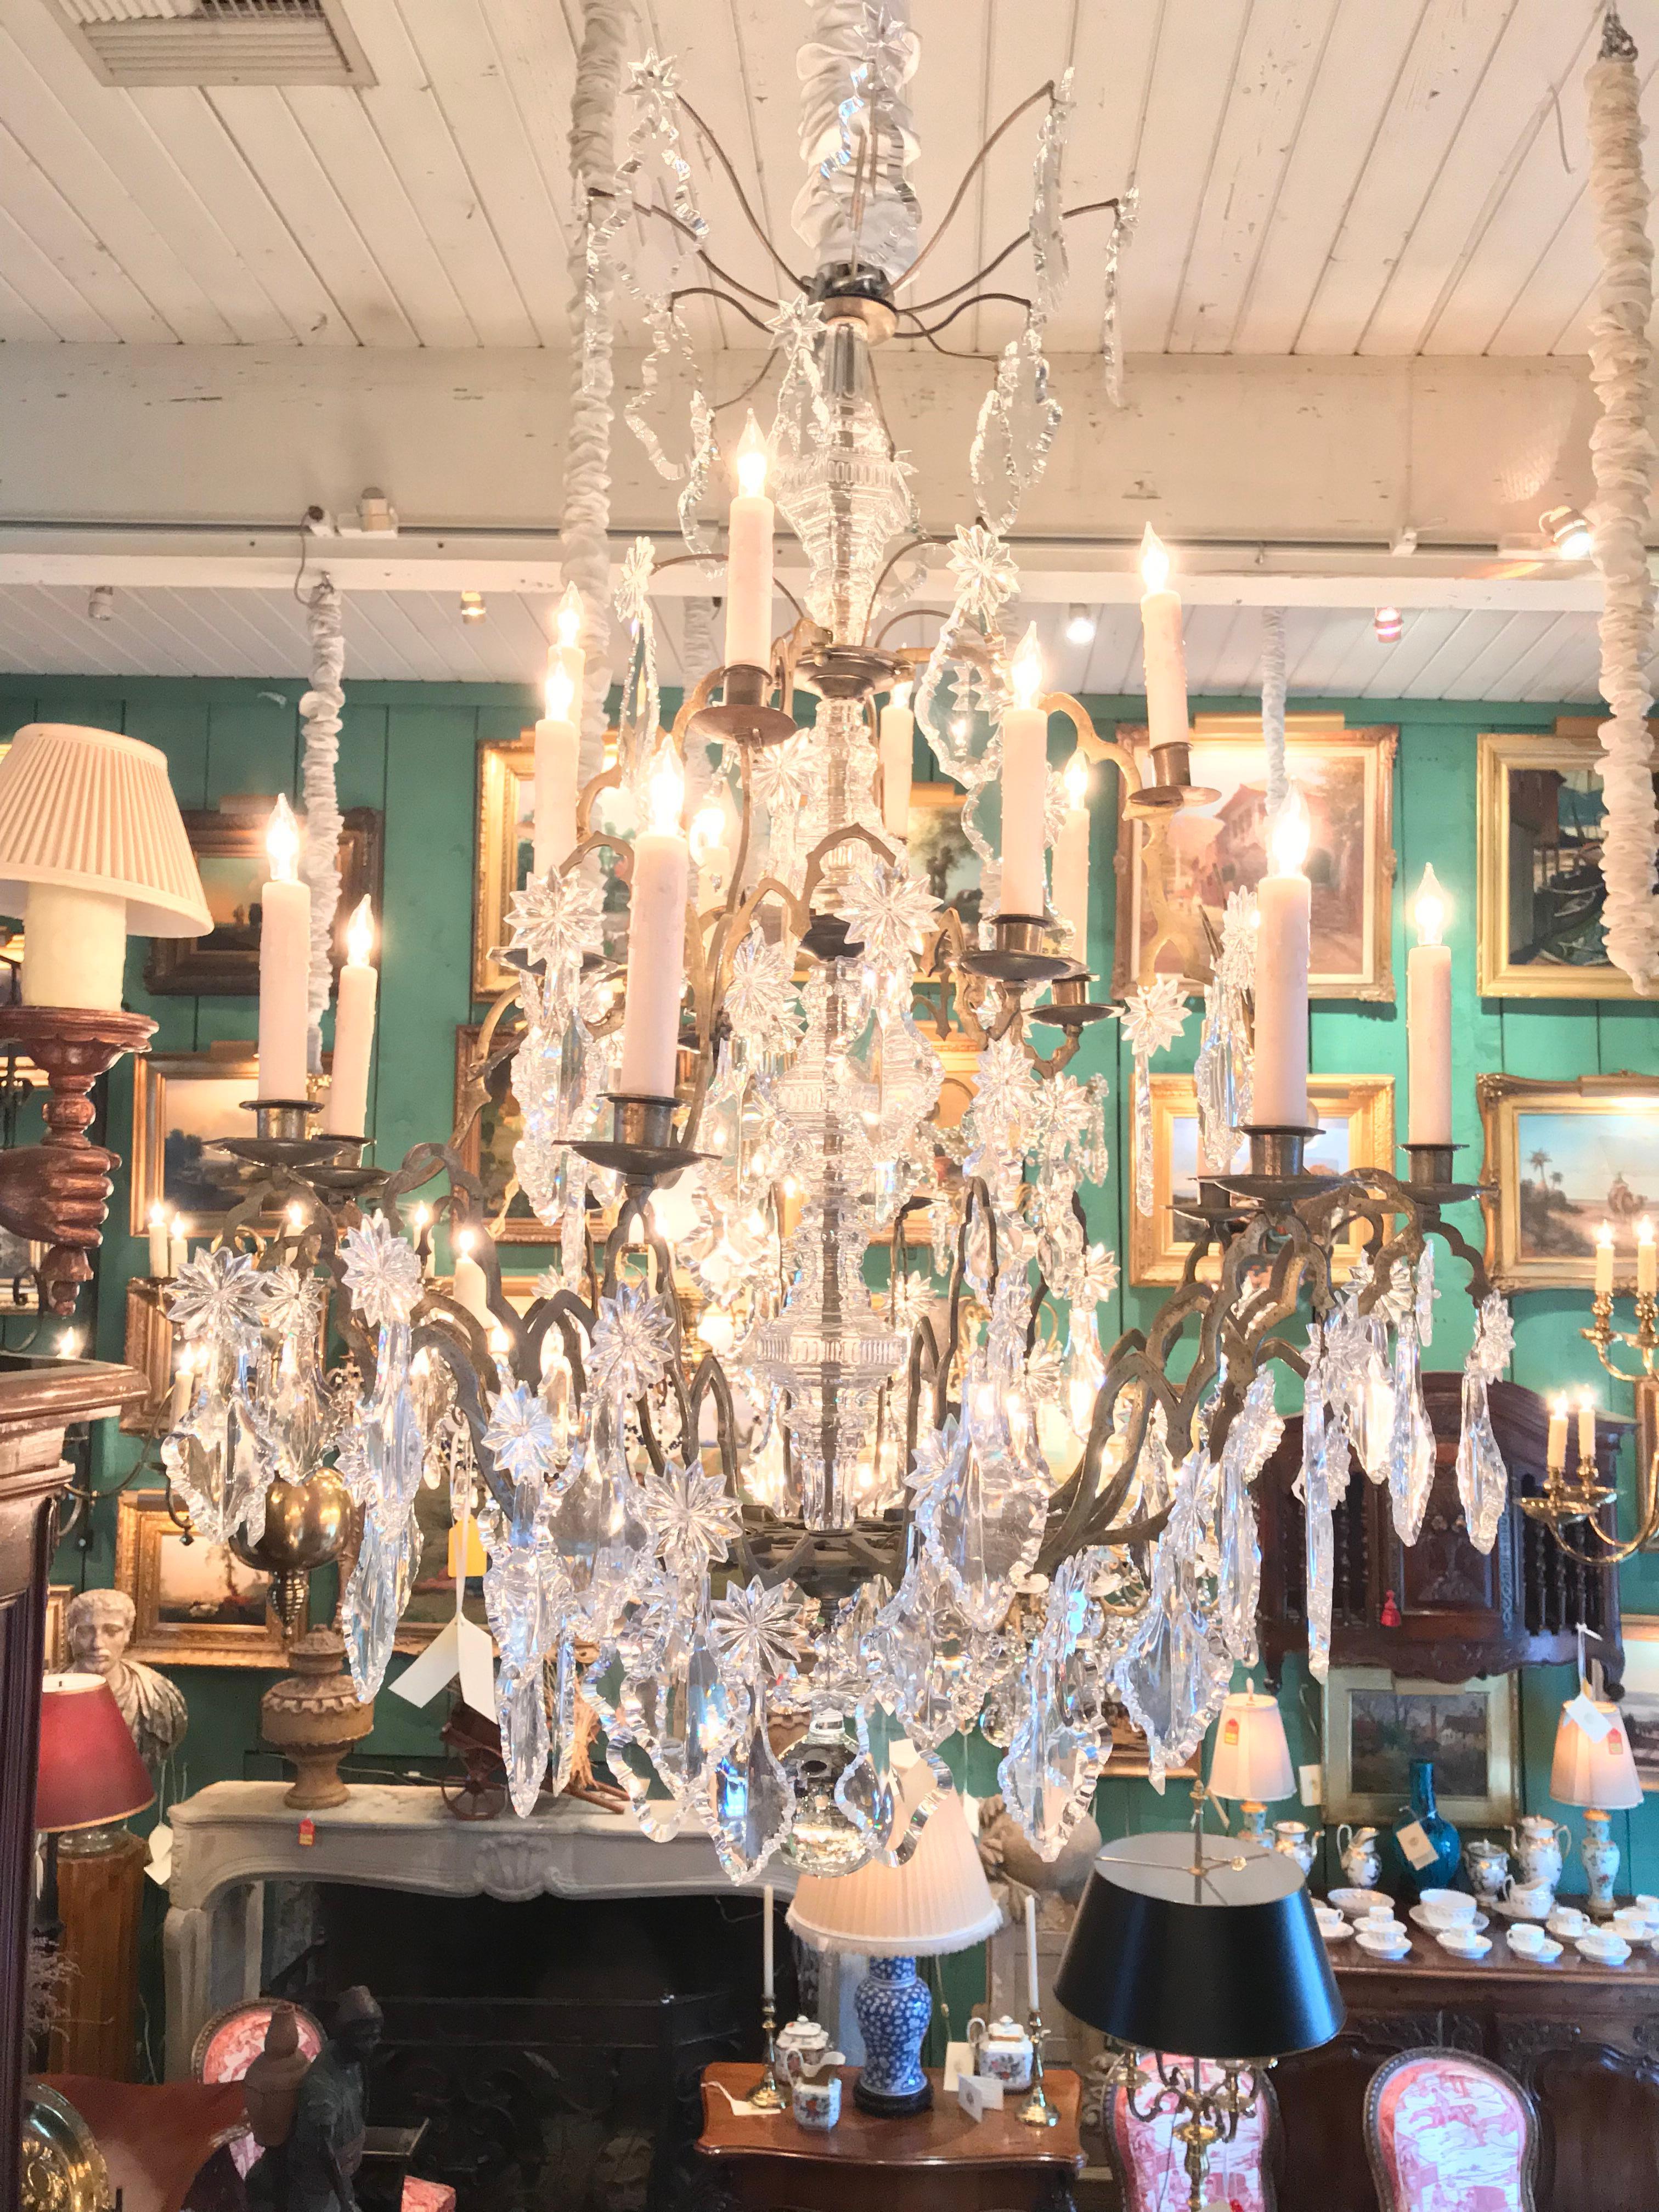 Large Baccarat Crystal Chandelier Dining ceiling 16 light fixture pendant LA CA. Late 18th Early 19th century Rare and Exquisite baccarat crystal chandelier 16 light with hand made crafted Elegant Bronze cage . French luxury manufacturer of fine